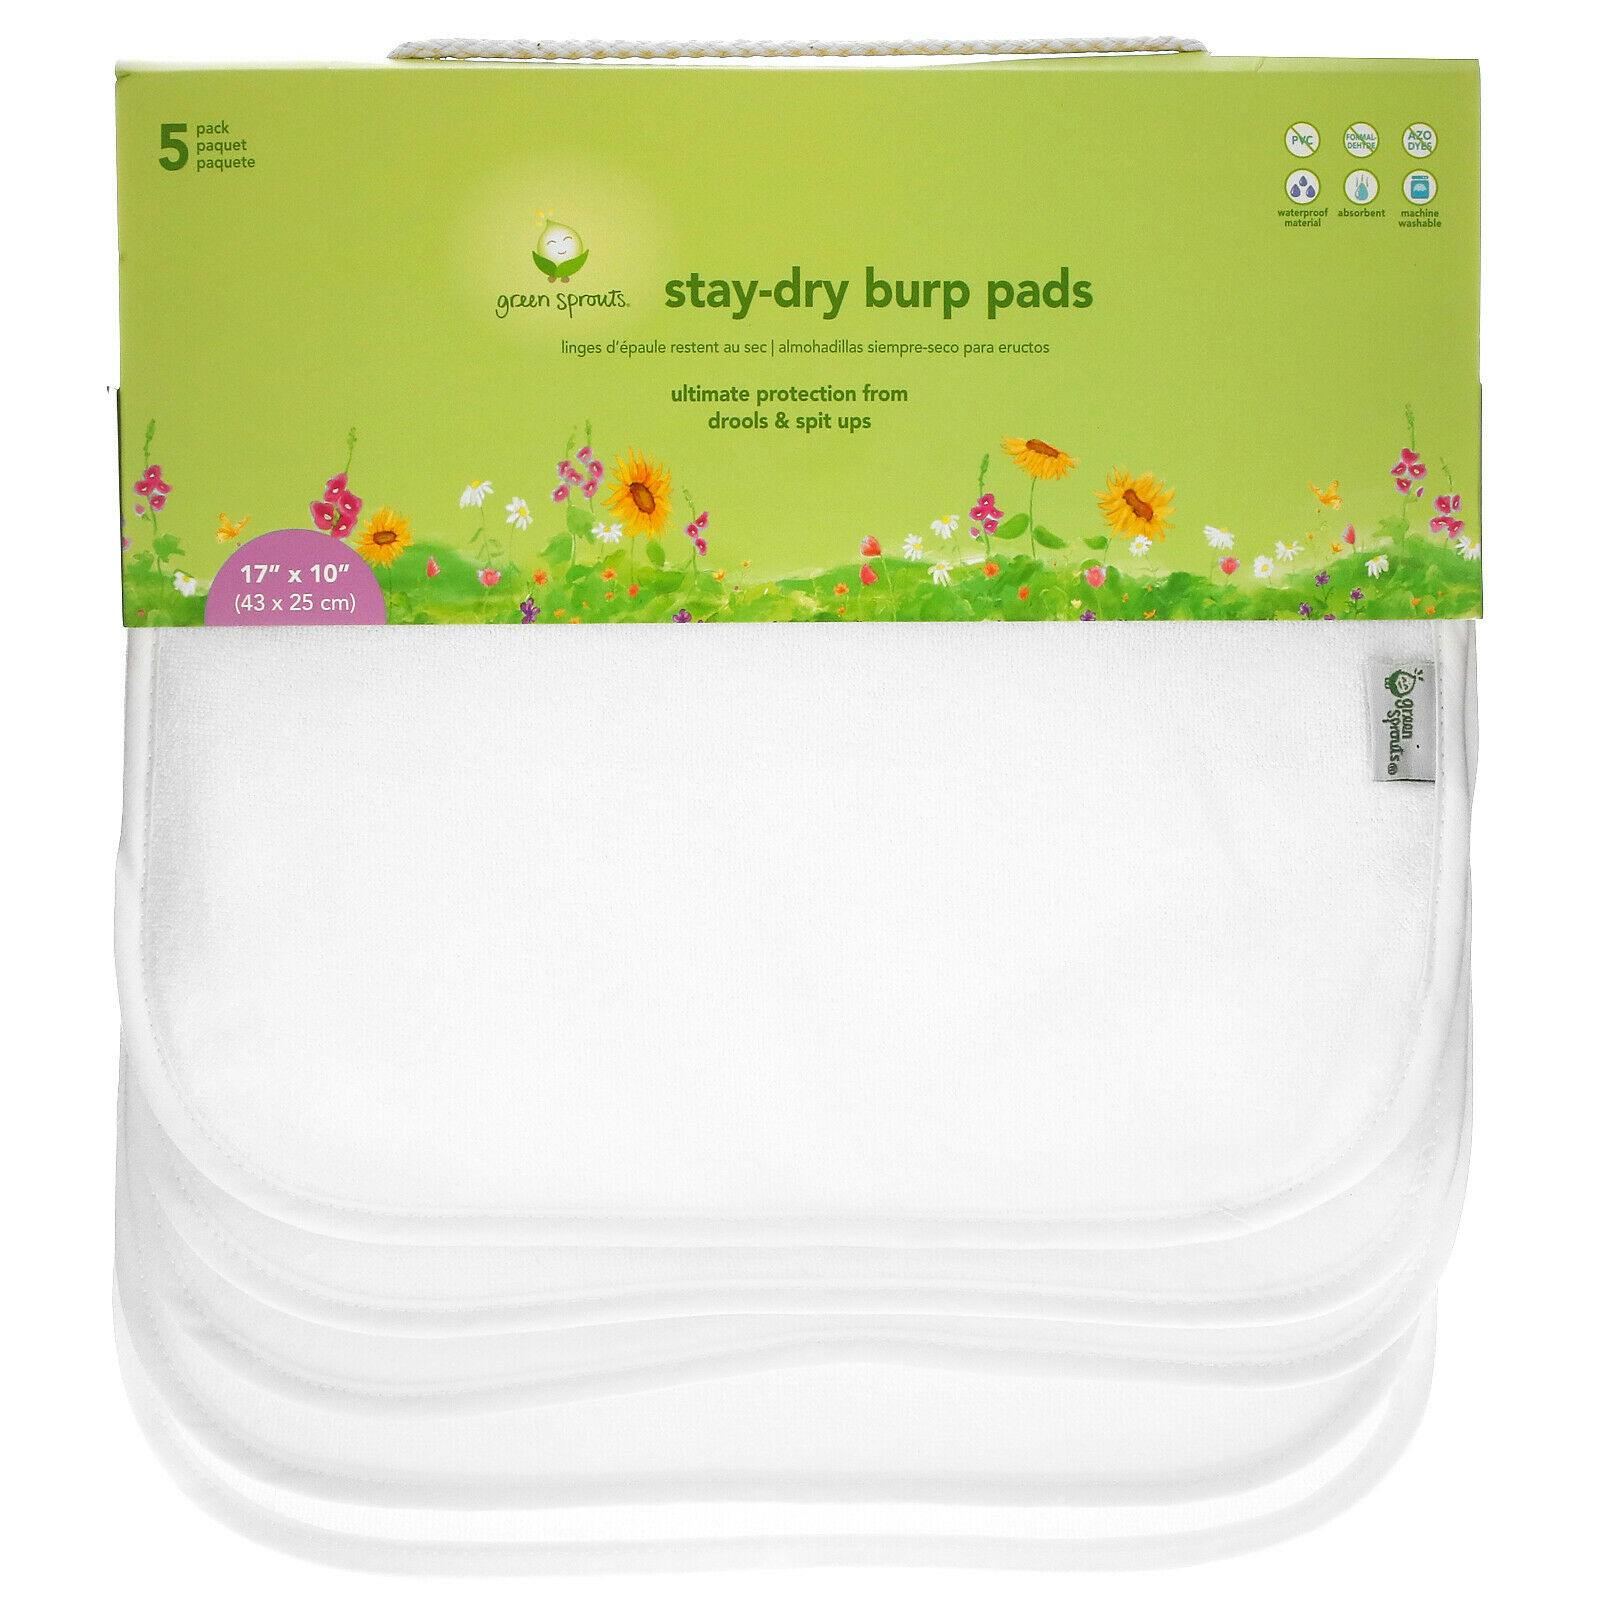 Green Sprouts Stay-Dry Burp Pads 5 Pack